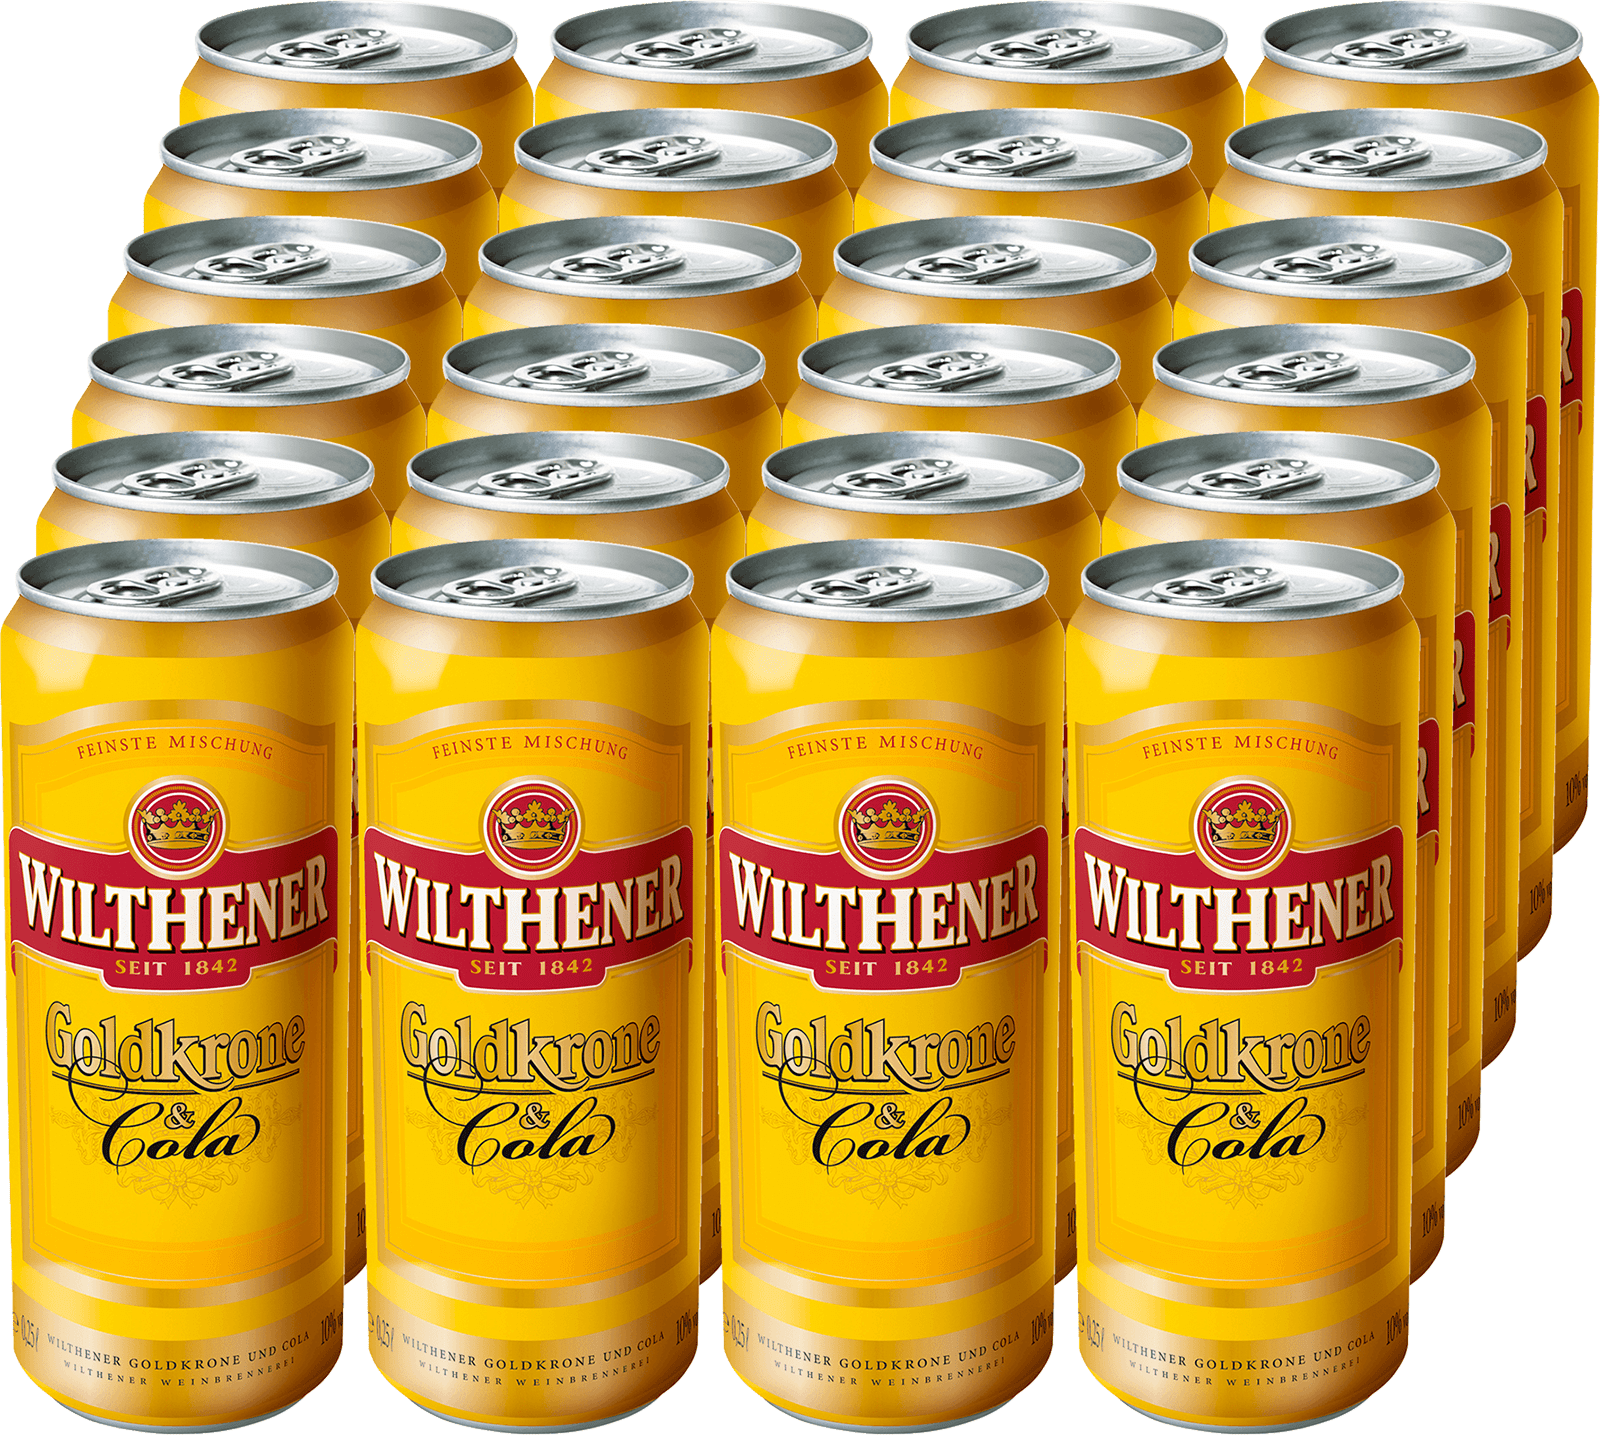 Wilthener Goldkrone | 28% | 1 l